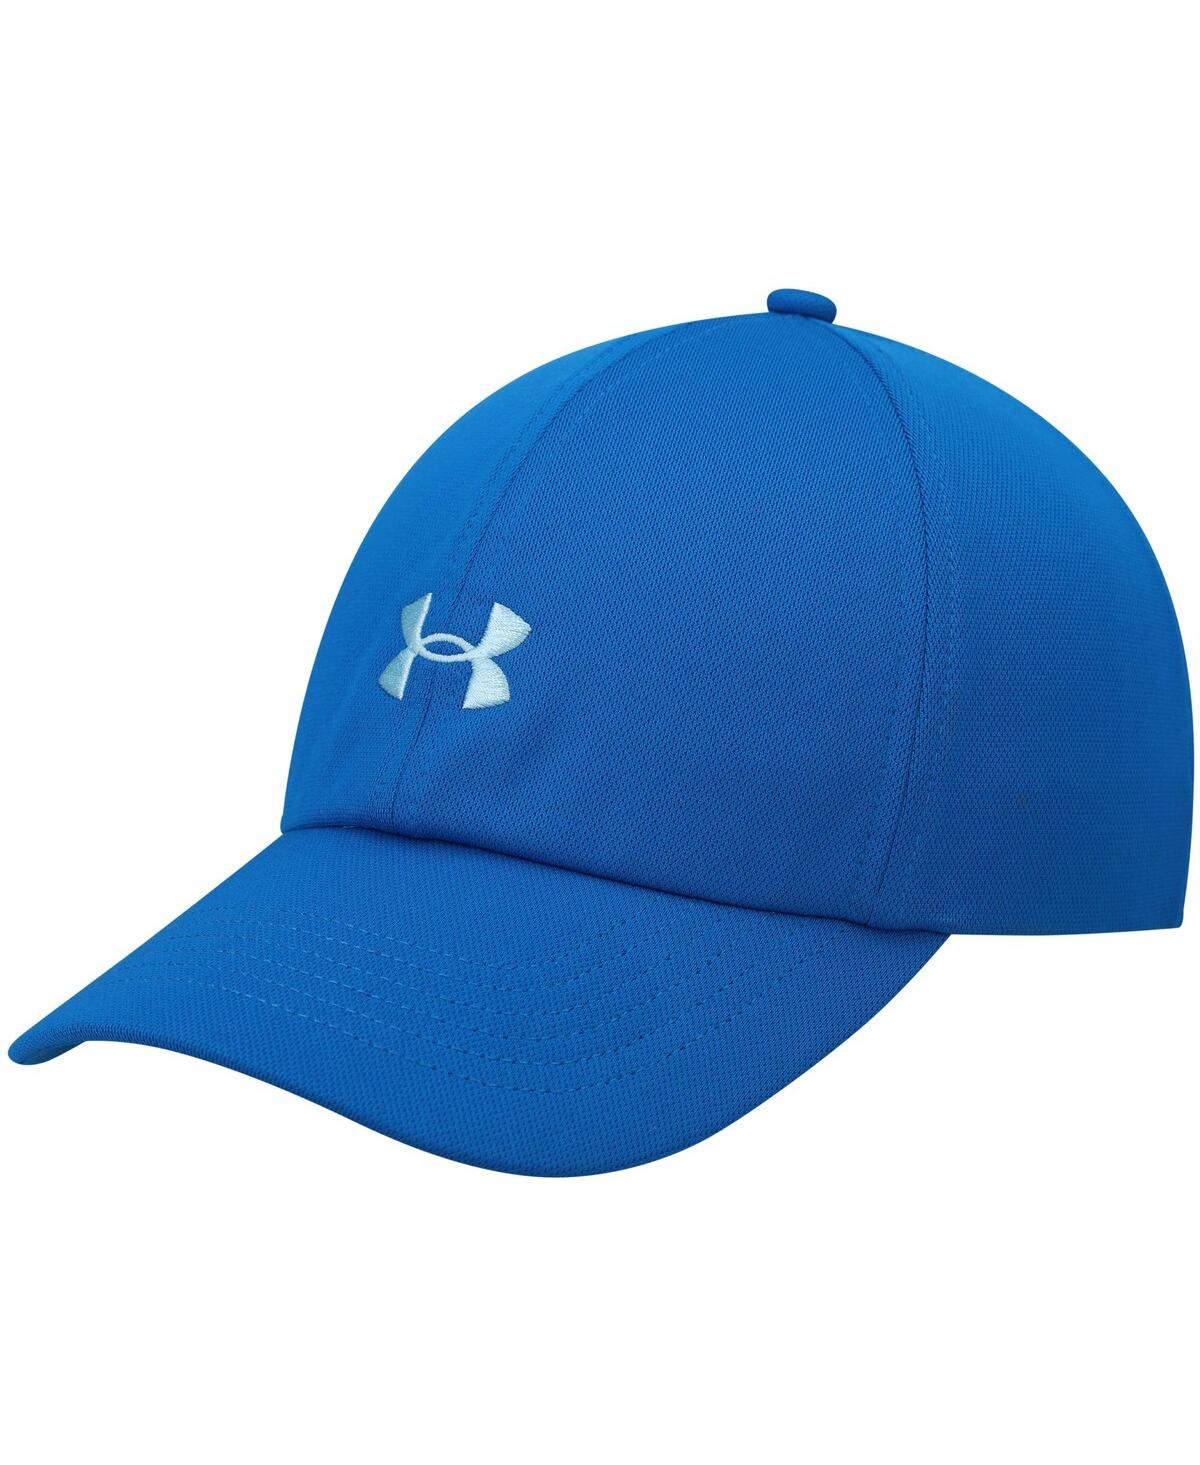 Under Armour Women's Blue Play Adjustable - Macy's